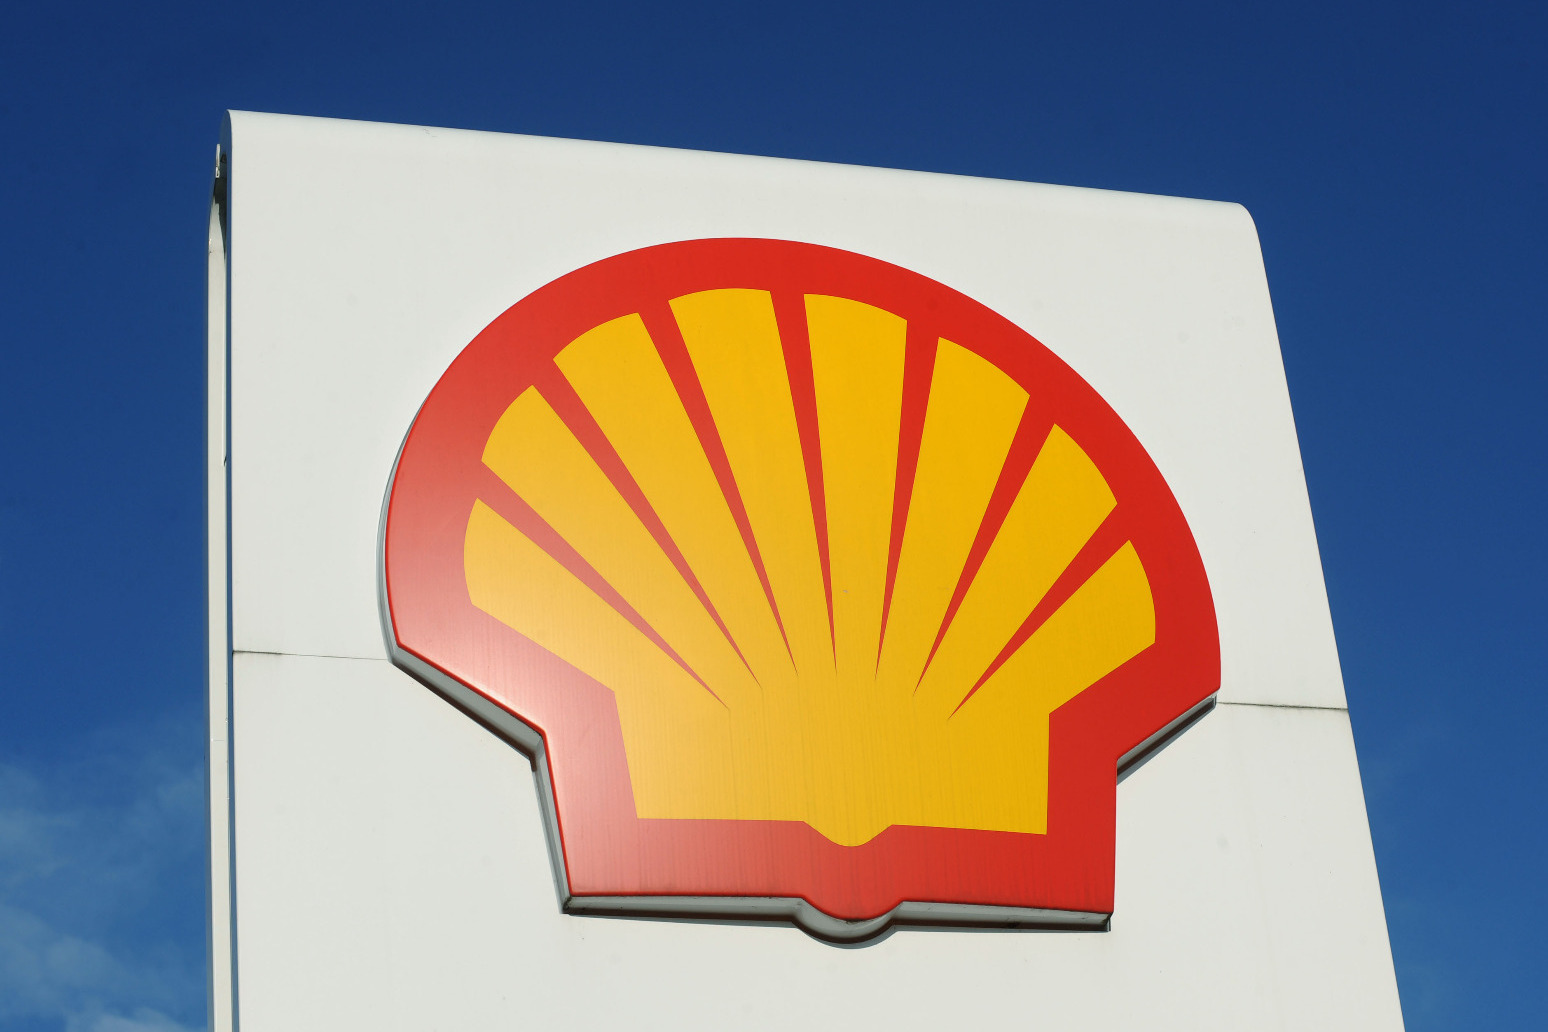 New Shell boss launches overhaul as executive roles cut 